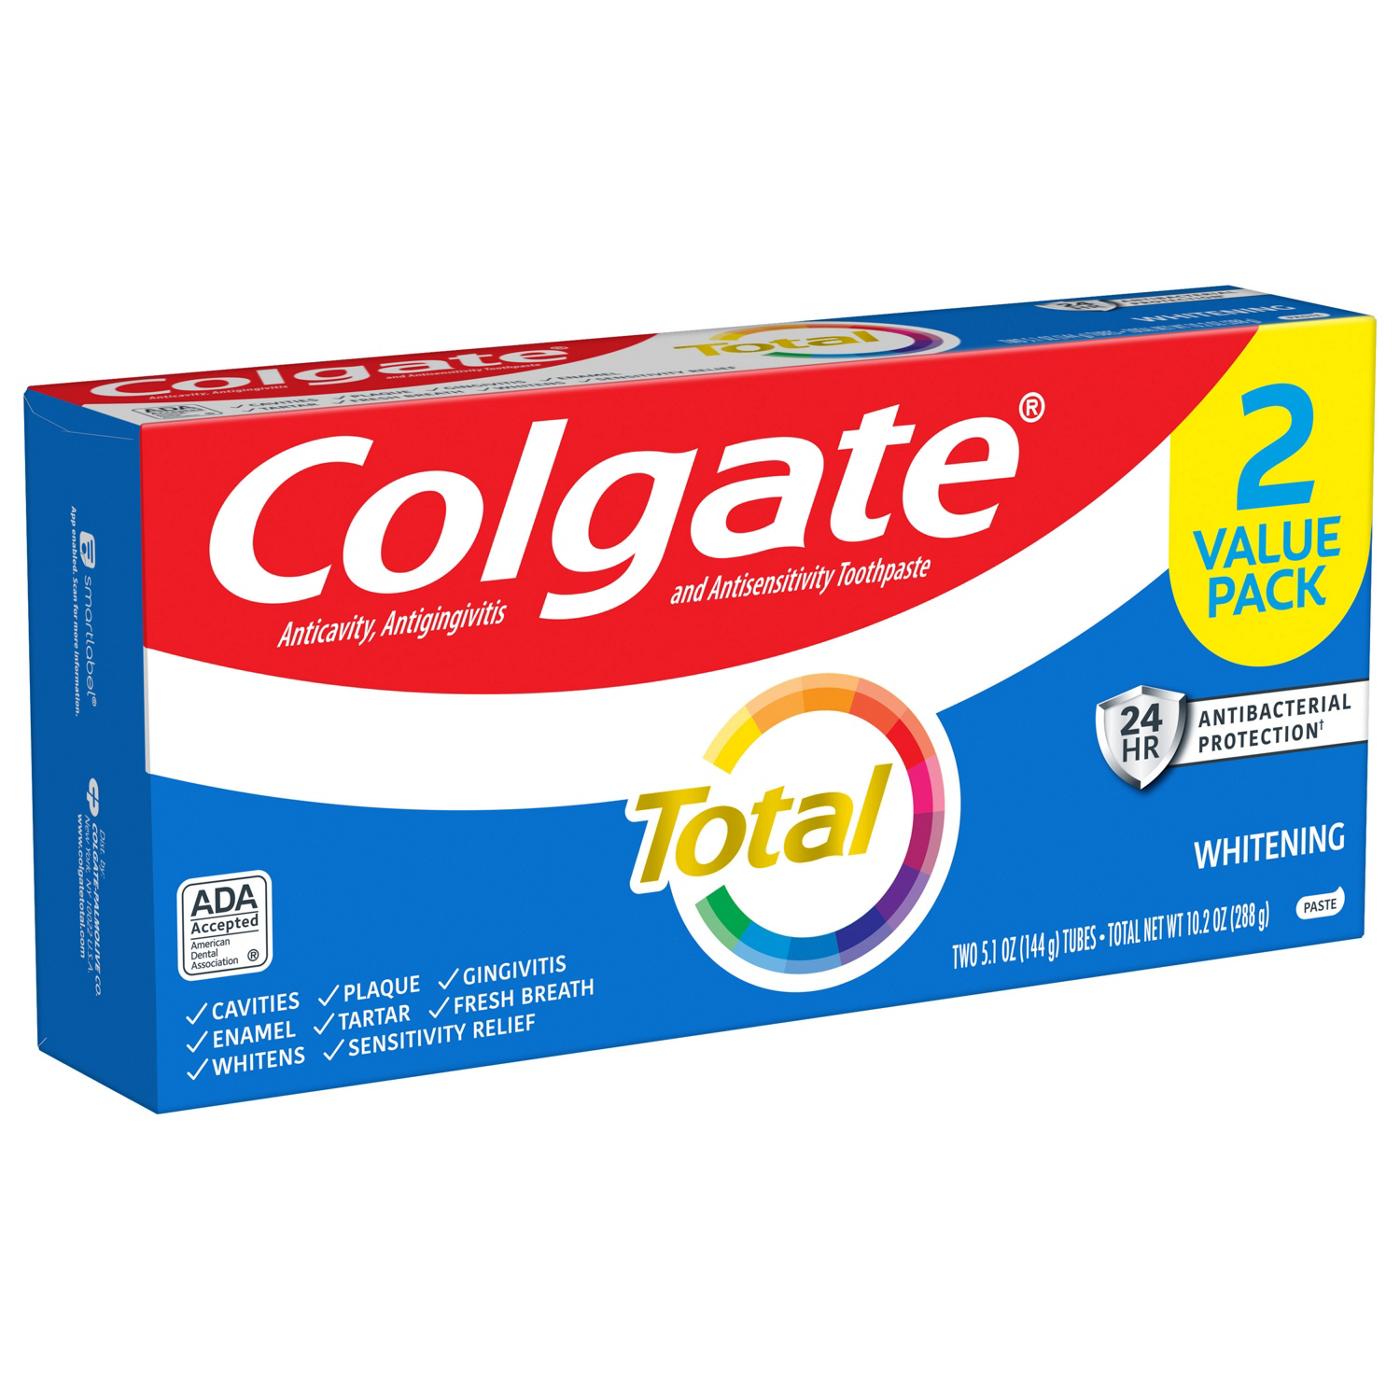 Colgate Total Whitening Toothpaste, 2 Pk; image 8 of 18